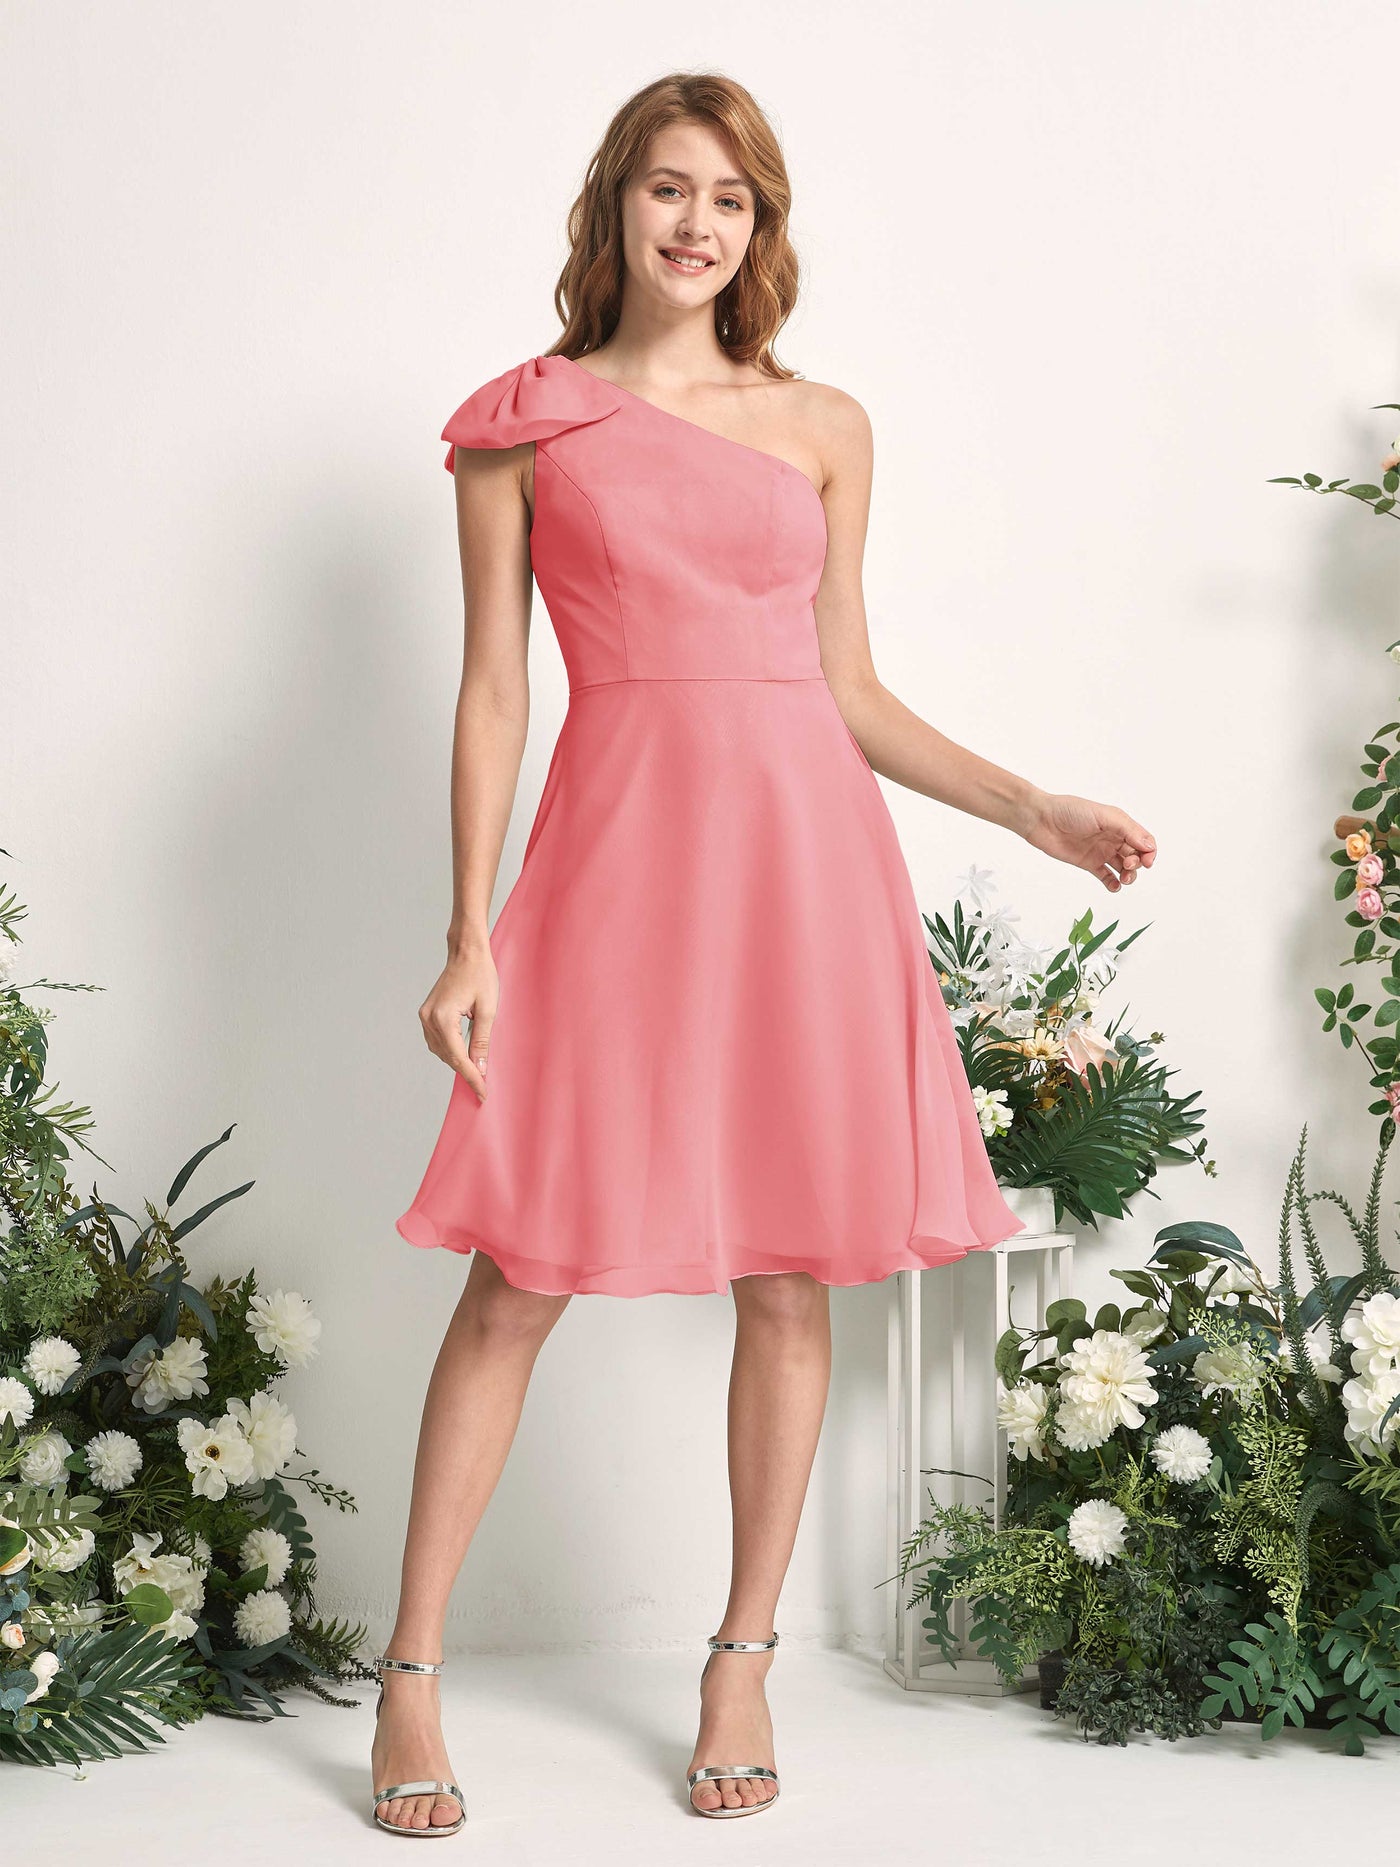 Bridesmaid Dress A-line Chiffon One Shoulder Knee Length Sleeveless Wedding Party Dress - Coral Pink (81227030)#color_coral-pink